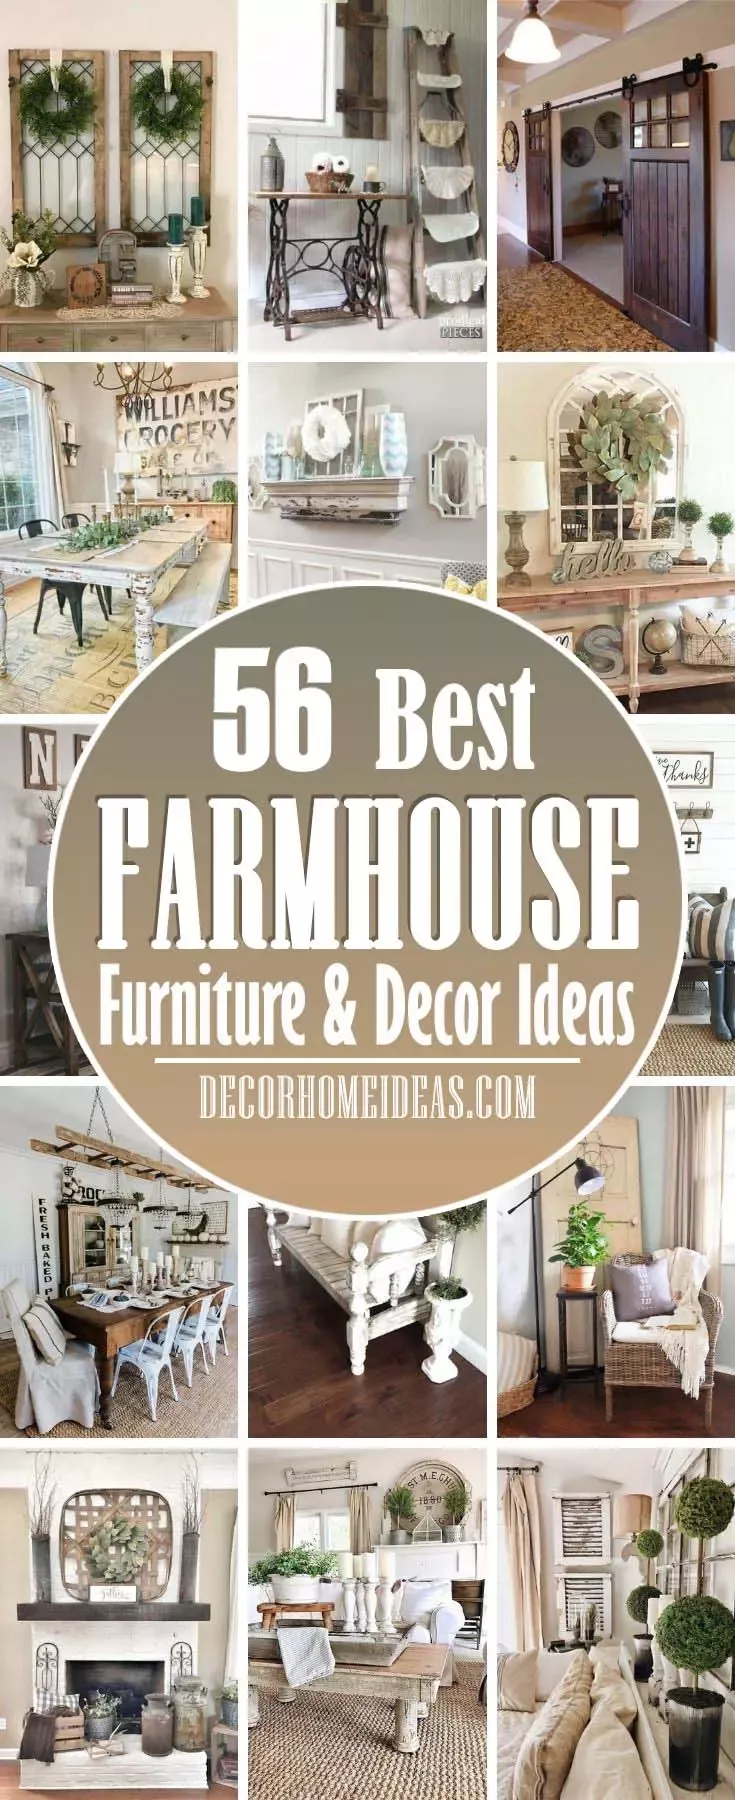 55 Stunning Farmhouse Furniture and Decor Ideas For Ultimate Rustic Feel